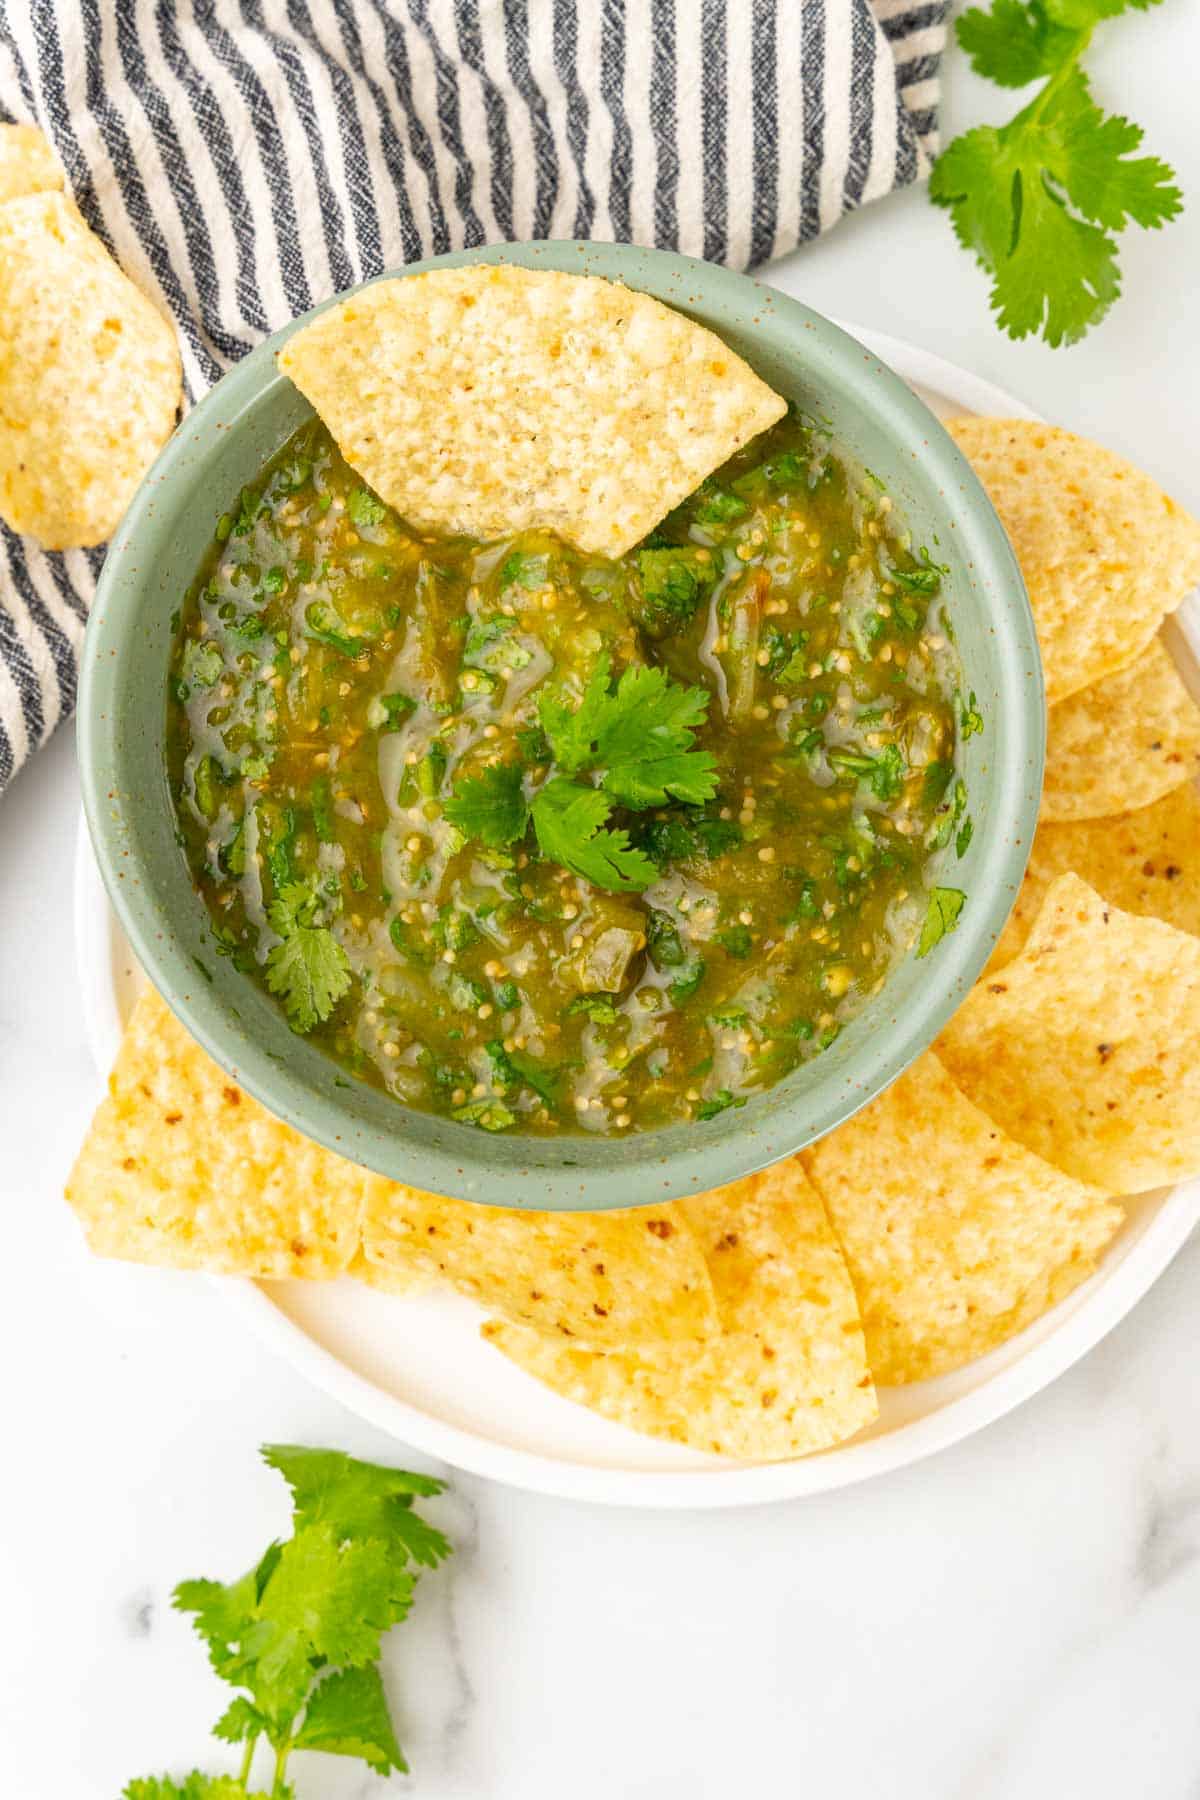 Tomatillo salsa in a light green bowl with cilantro on top and a tortilla chip sticking out of the salsa. Bowl is on a white plate with more tortilla chips on a white marble countertop next to a blue striped cloth napkin with more cilantro and tortilla chips scattered about